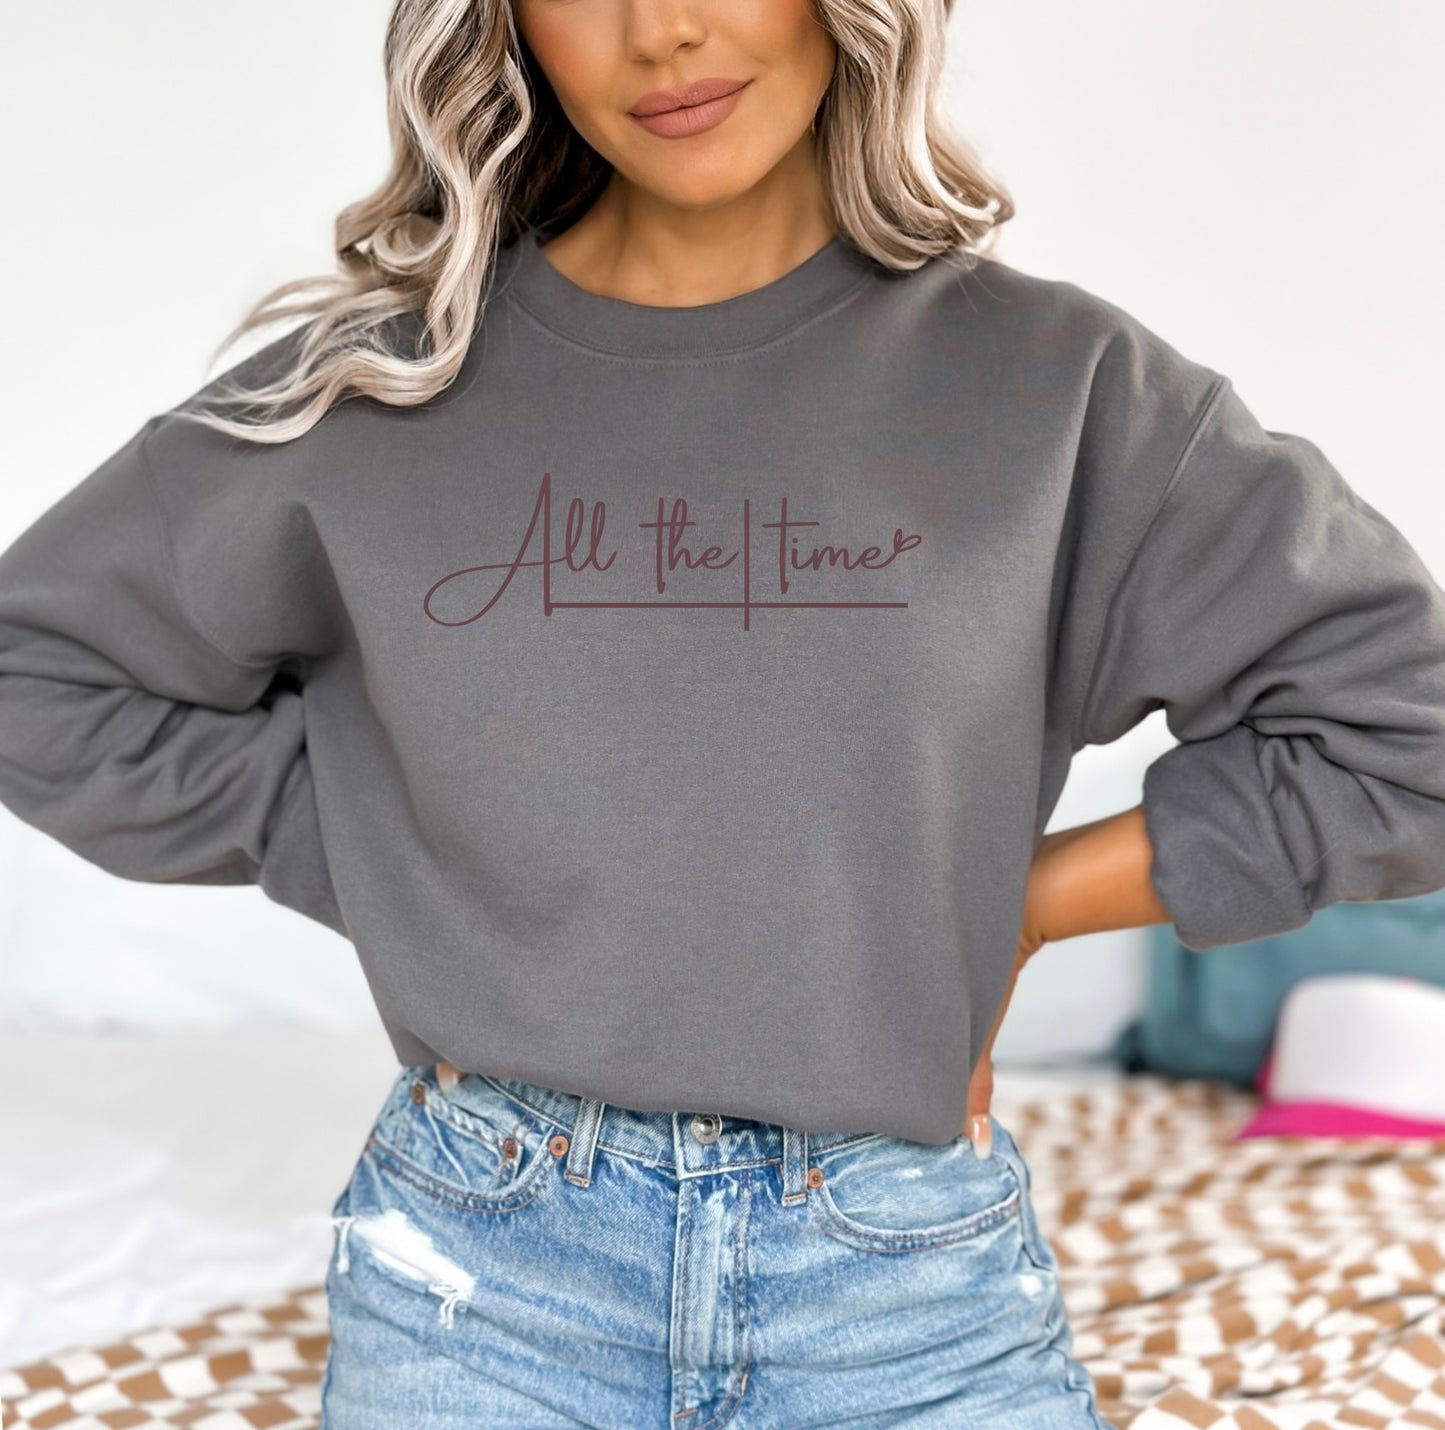 All the time Shirt, Mental Health Sweater, Christian Hoodie, Religious Gift, Catholic Tee, Aesthetic Sweater, Comfy Sweatshirt